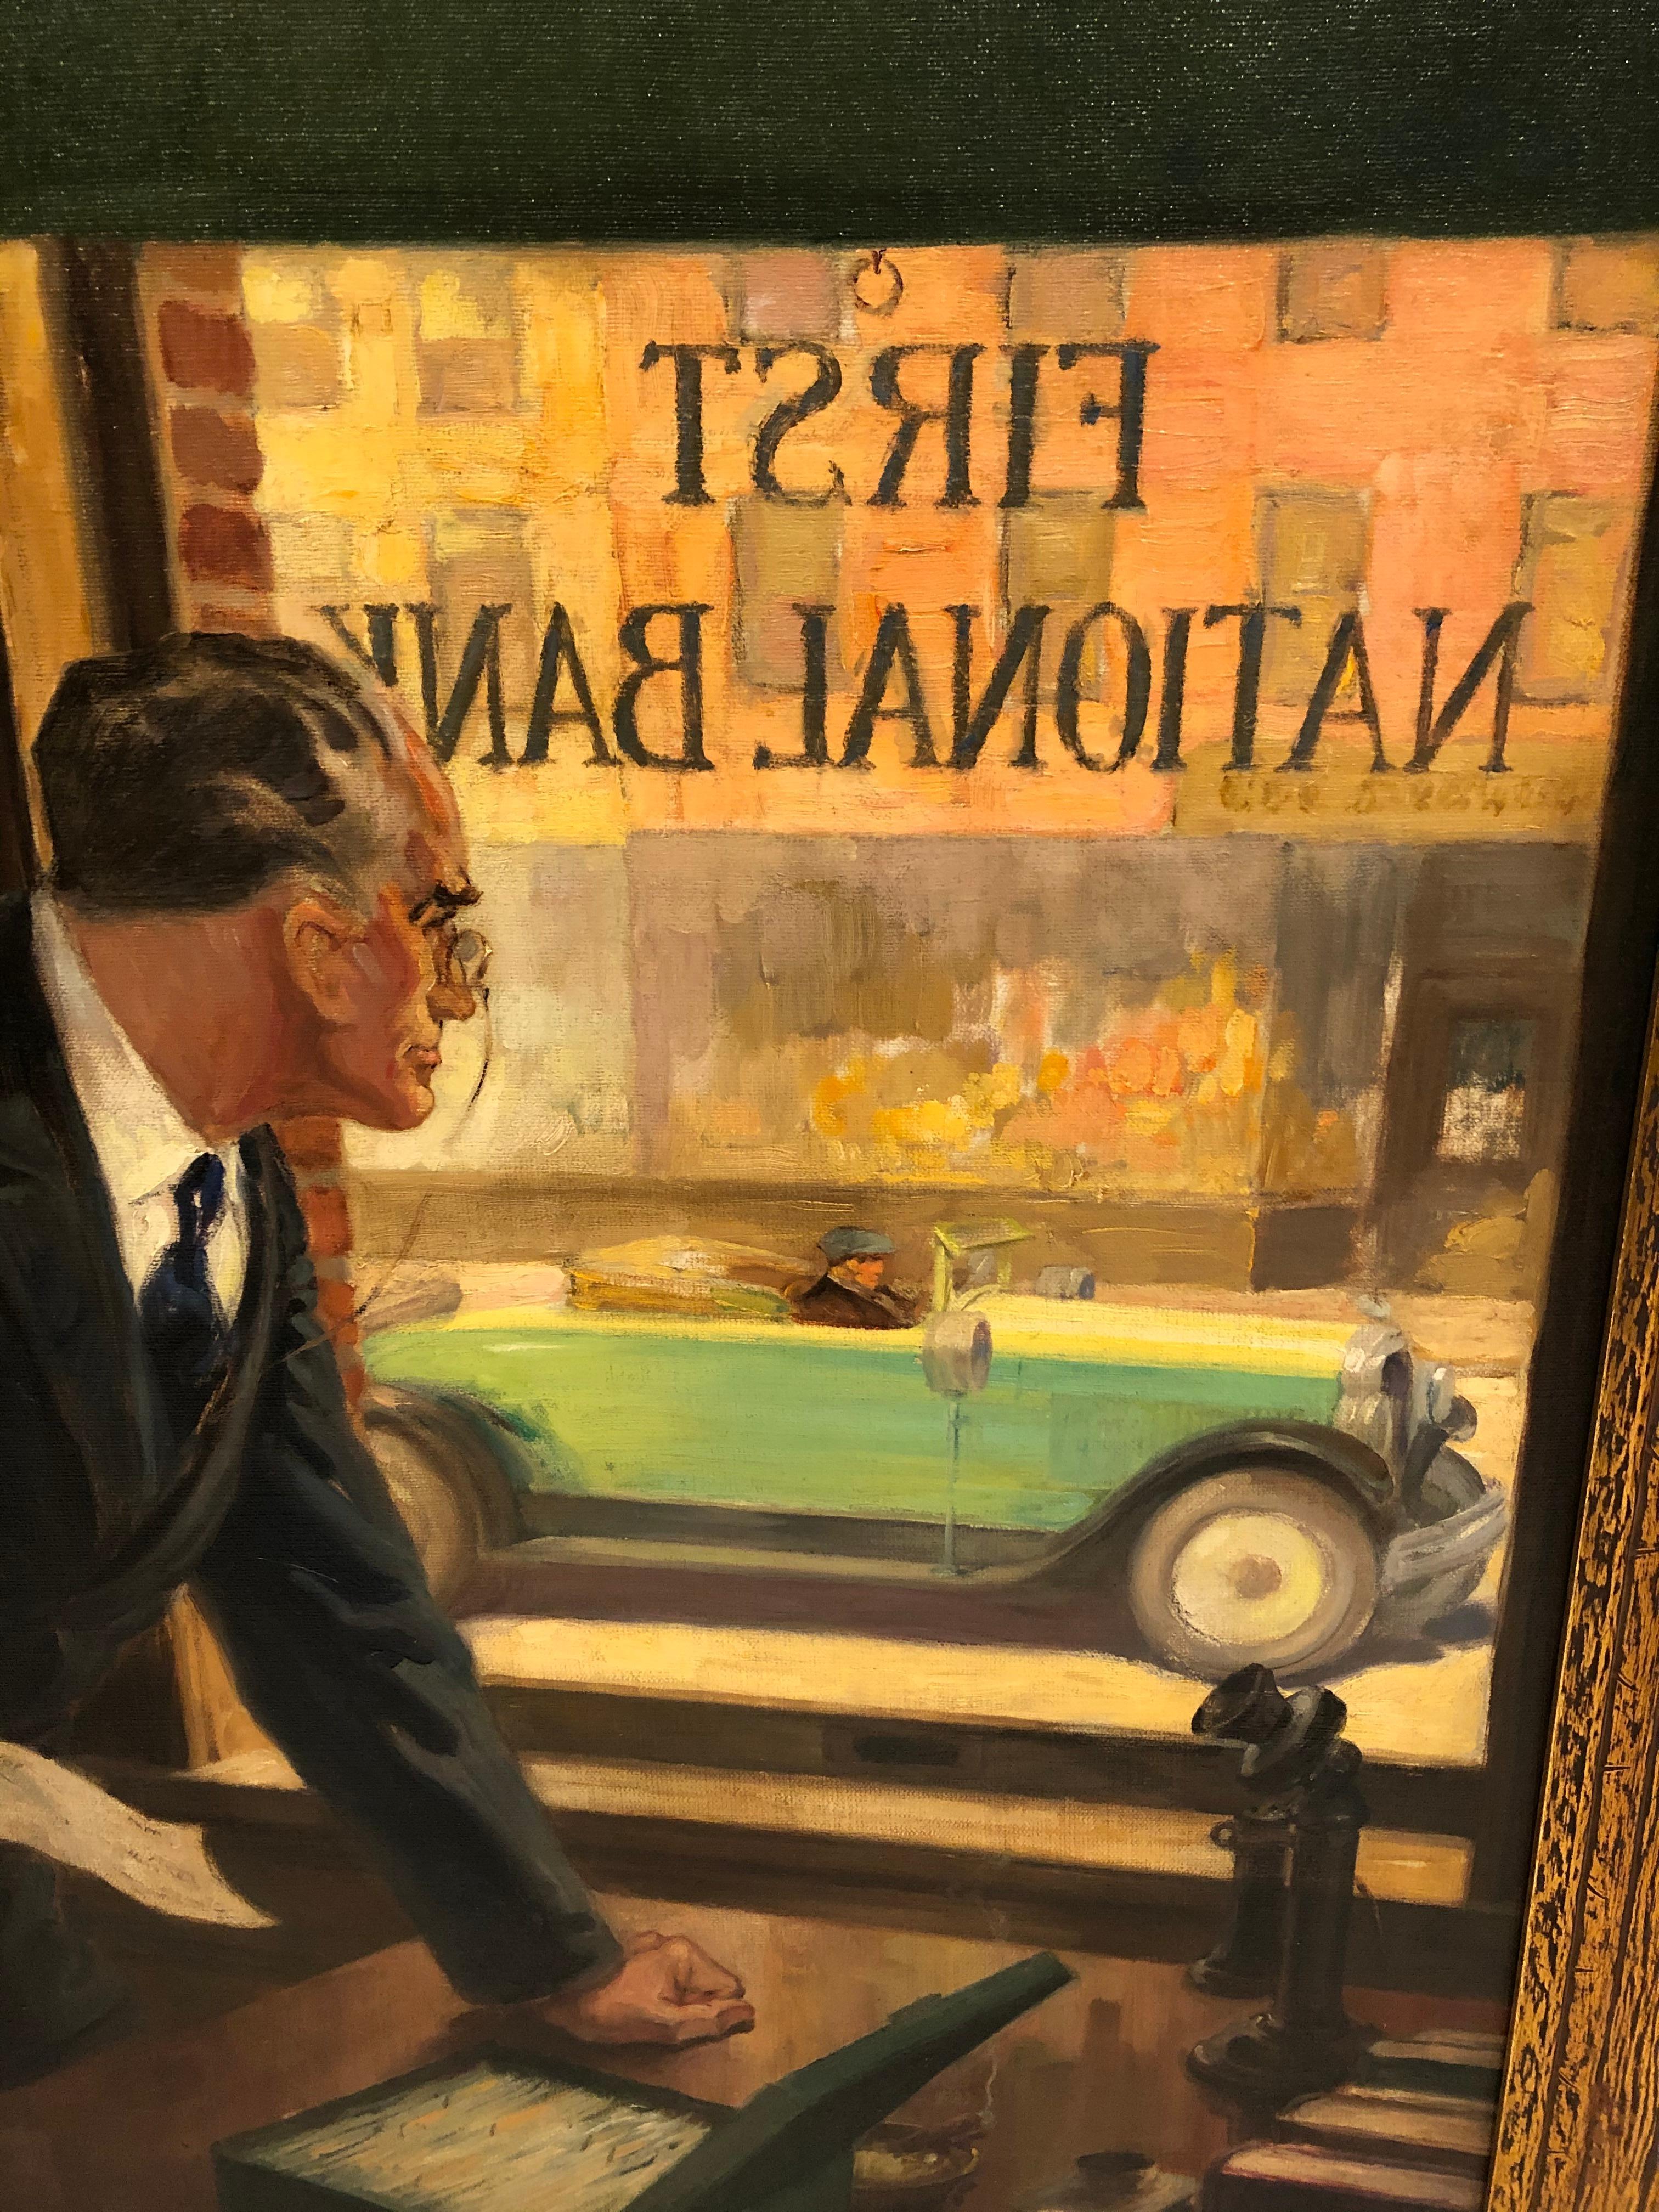 Wonderful interior and portrait of a banker looking enviously at a fancy green sedan convertible automobile. Marvelous warm colors and feeling of illumination, and a scene that could be from an old time movie. Walter De Maris, 1877-1947 was a